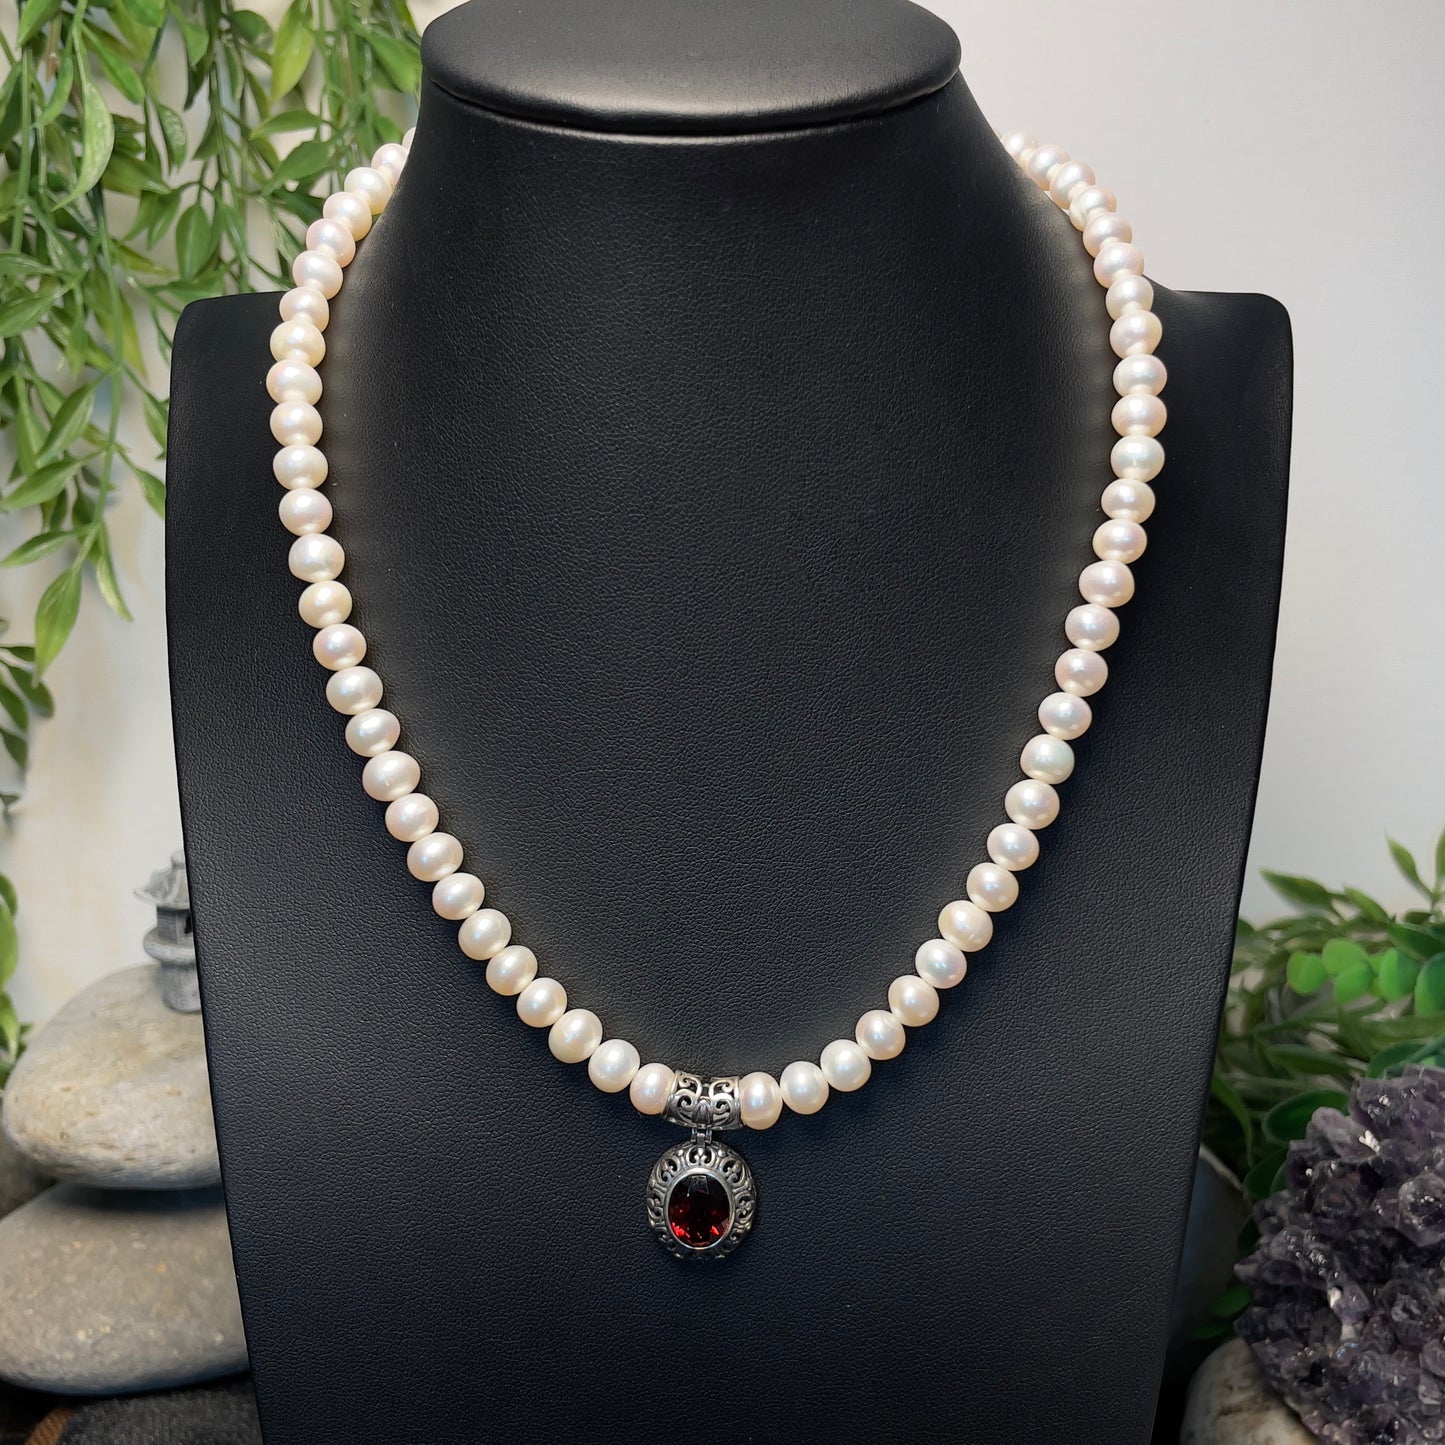 Stonelry High-Quality Natural Garnet Pendant Pearl Necklace